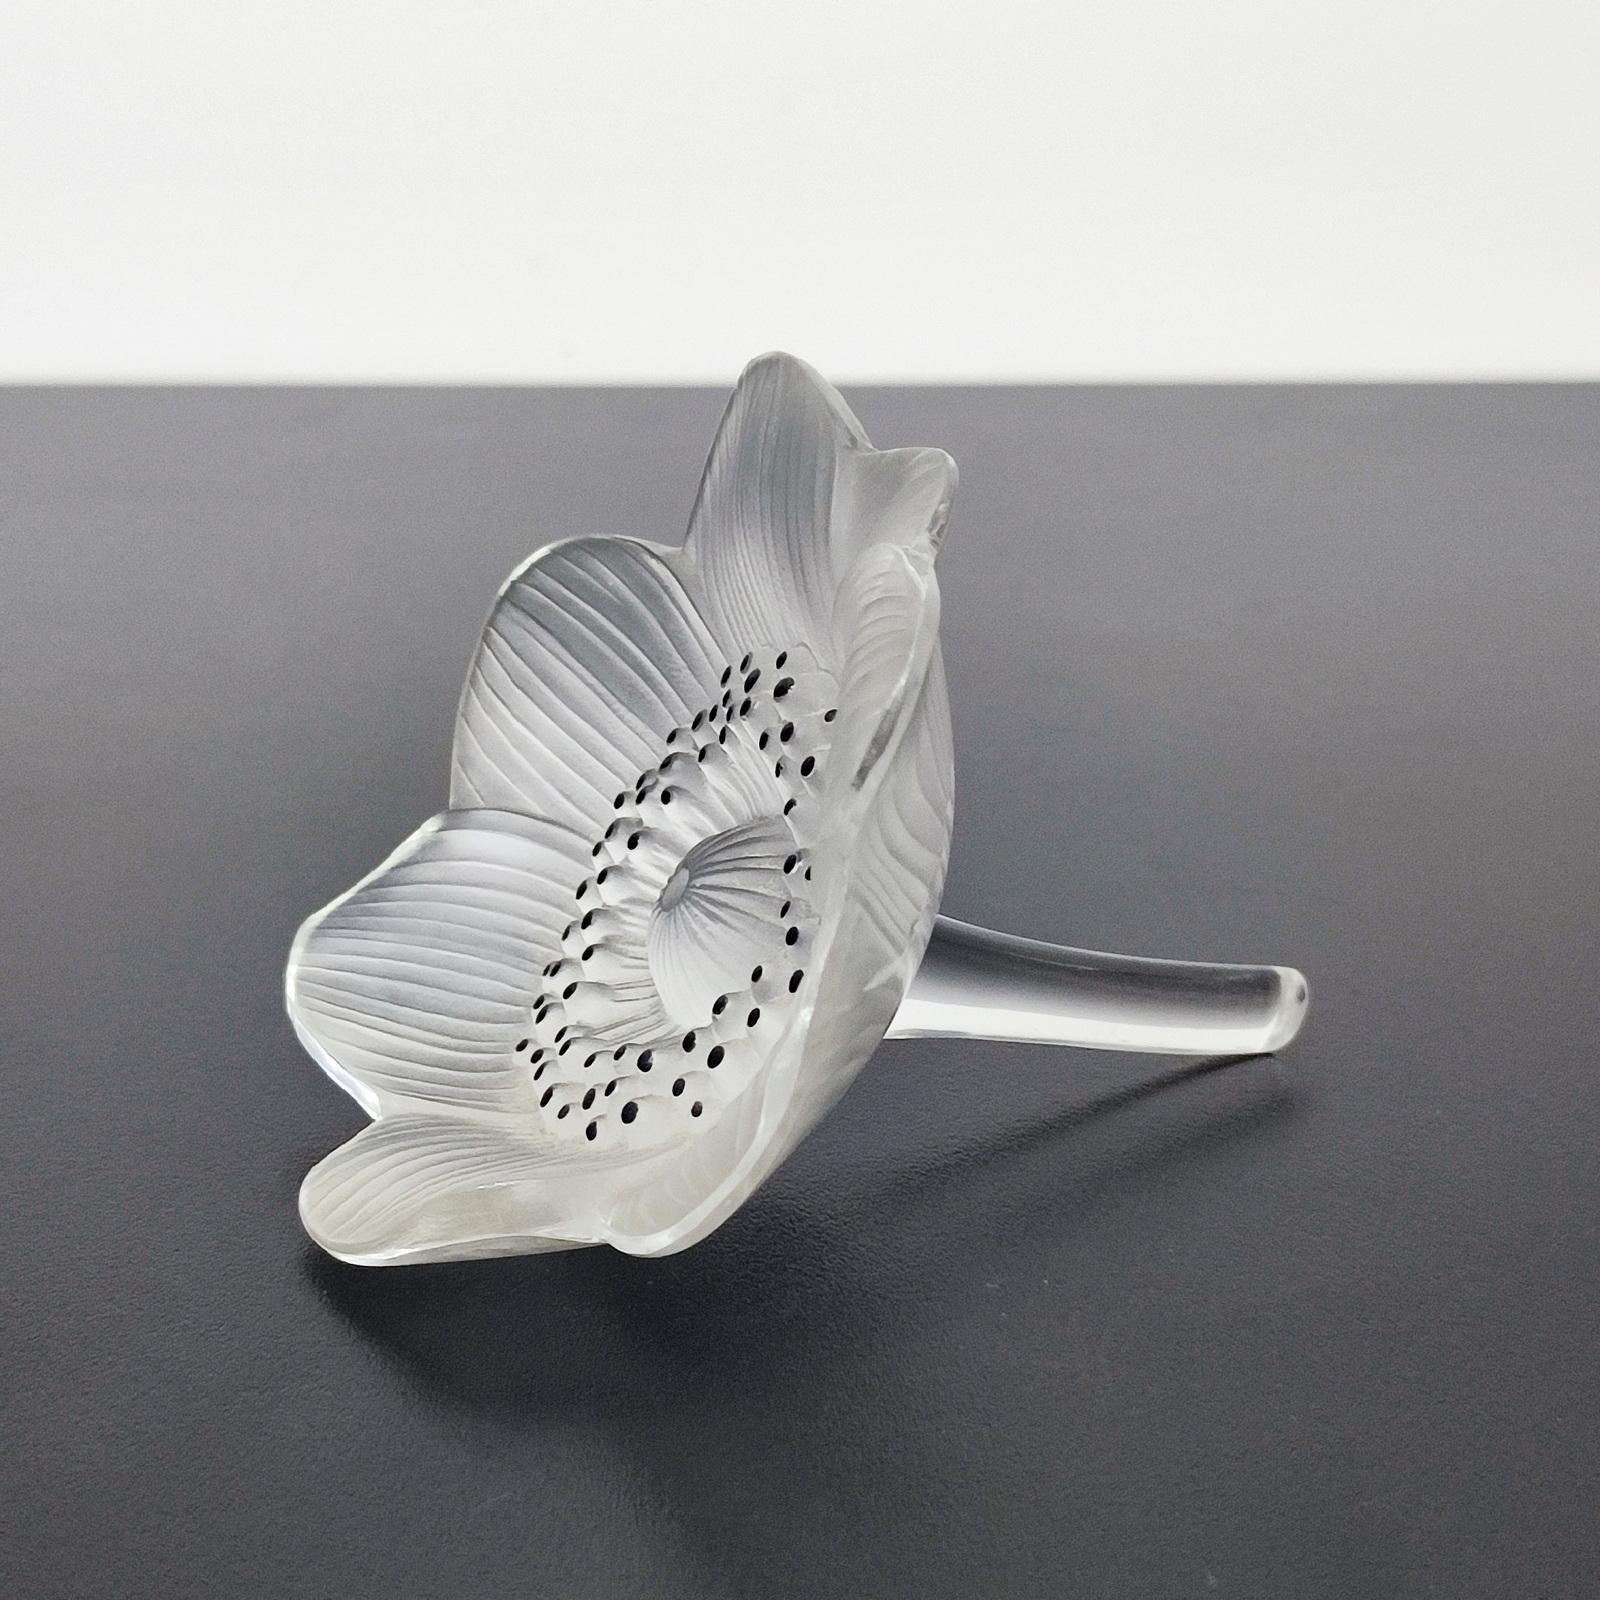 French Lalique France Vintage Anemone Flower Sculpture, Paperweight - FREE SHIPPING For Sale